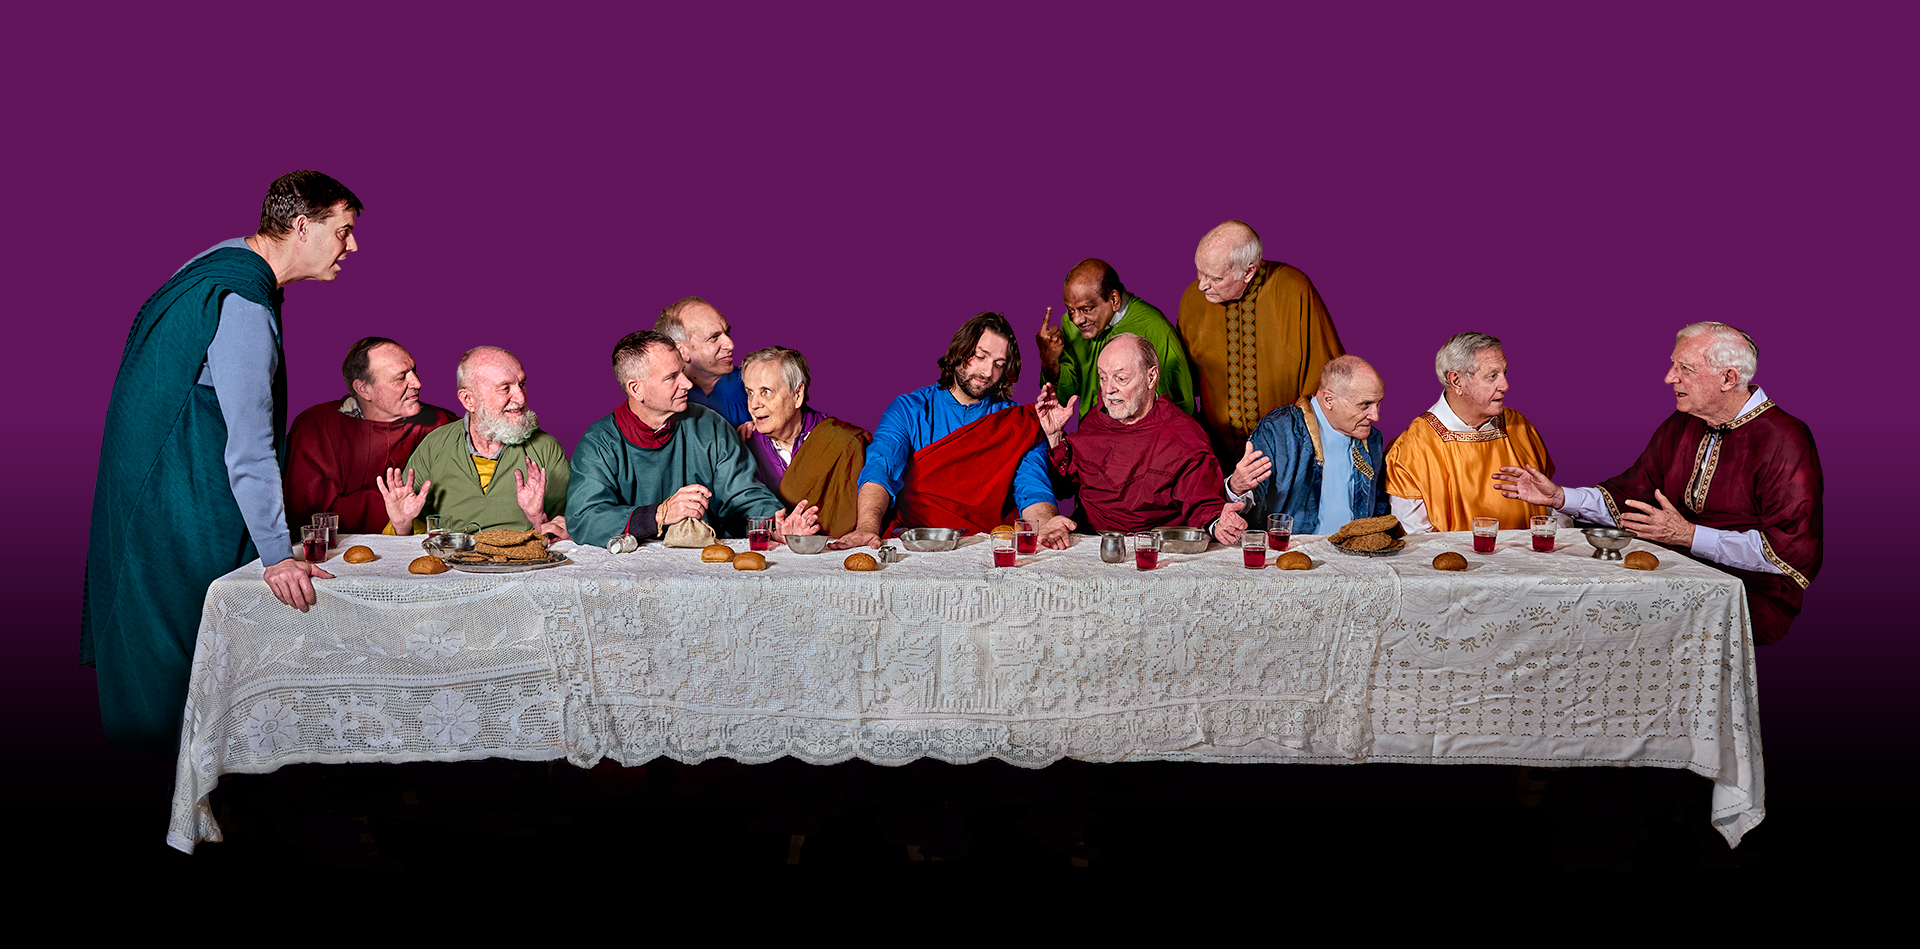 Mike Feraco – Last Supper Reenactment – 3RD